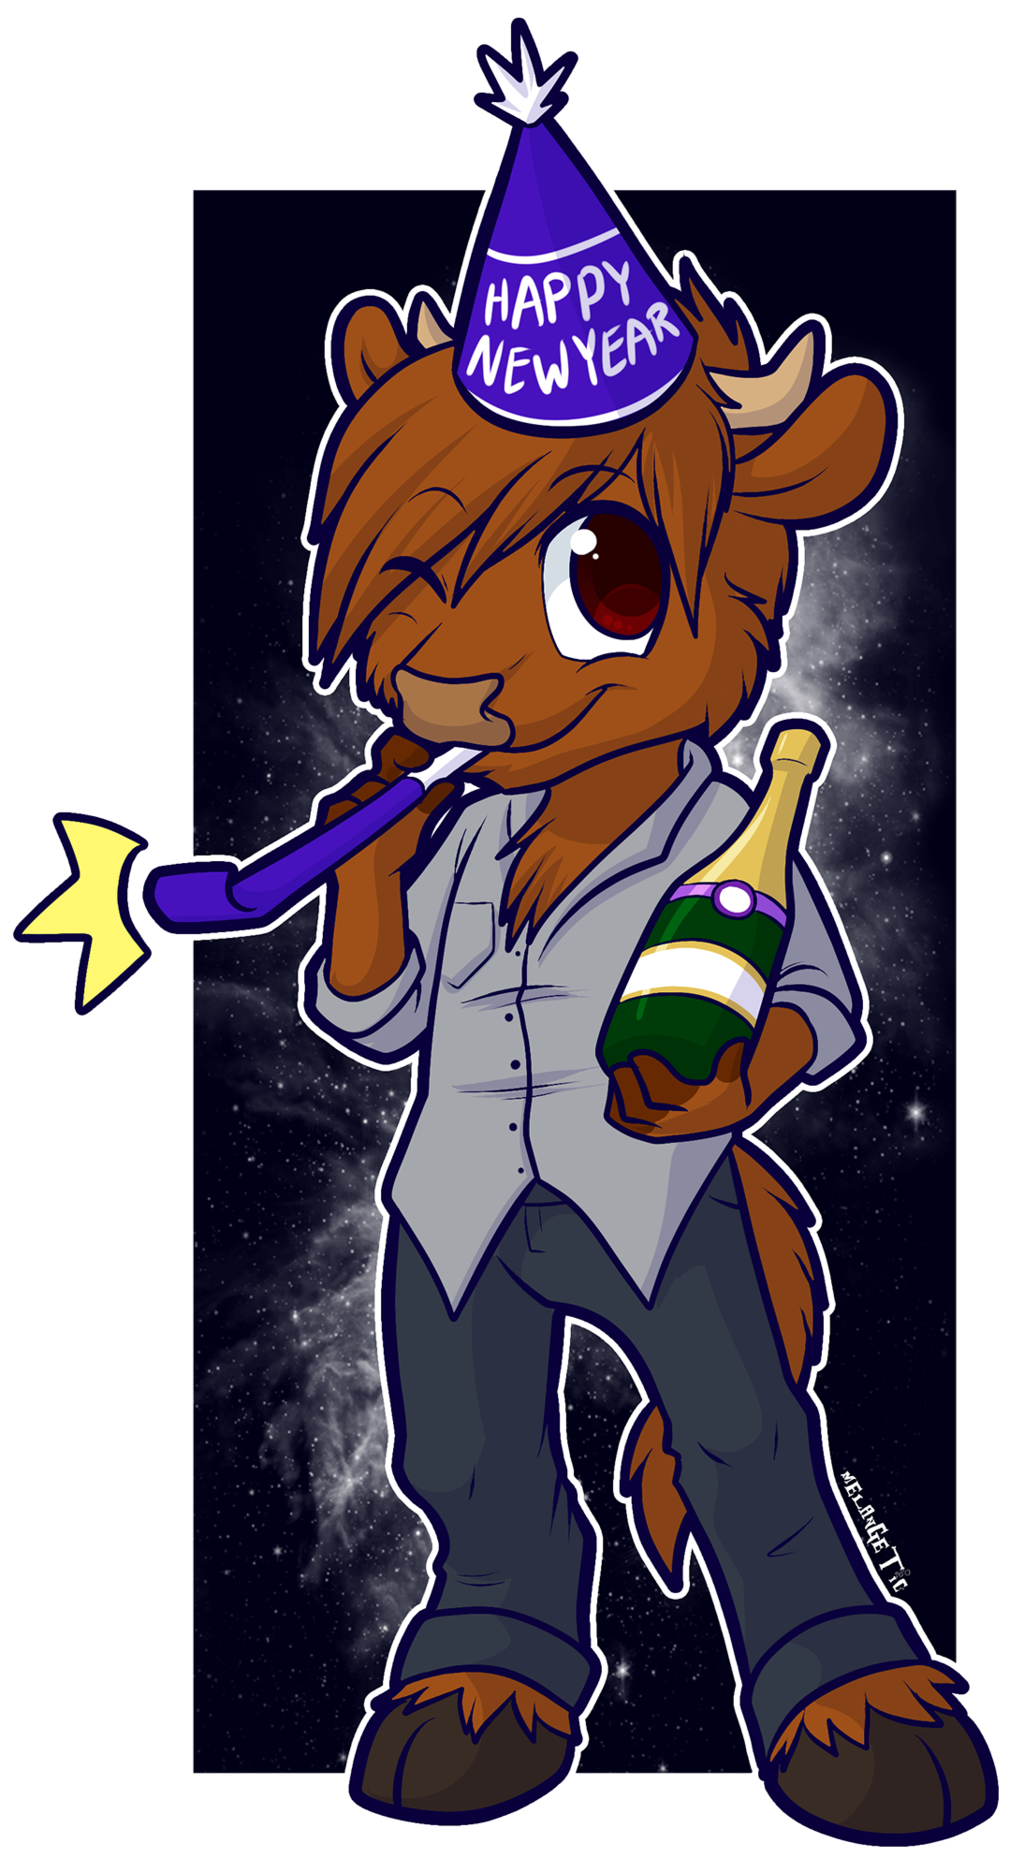 Ringing in the New Year! - by Melangetic